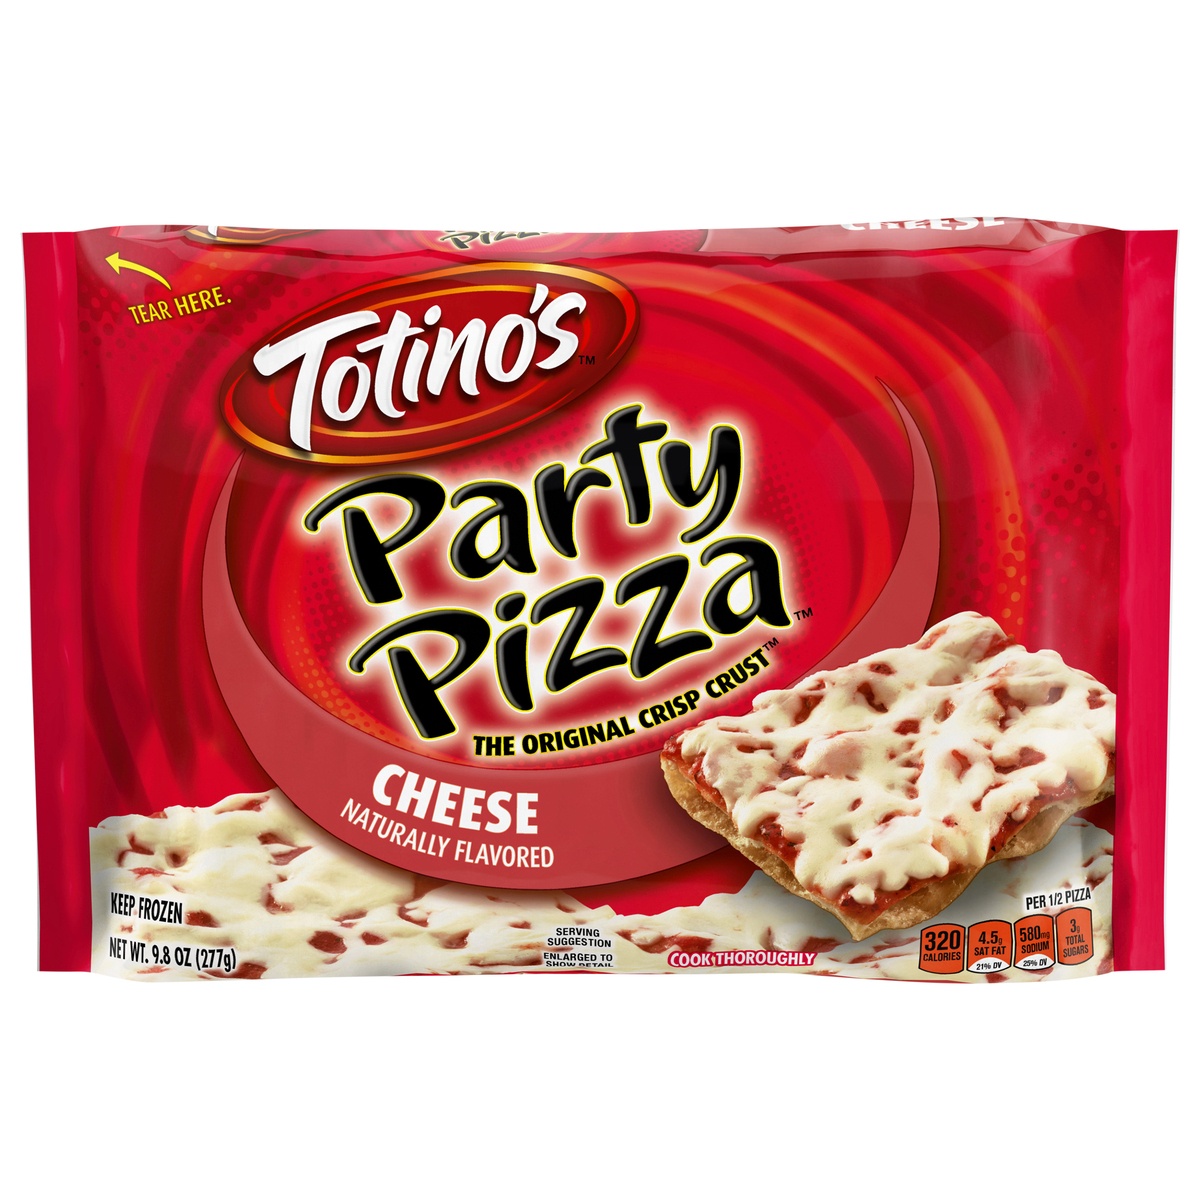 slide 11 of 11, Totino's Party Pizza, Cheese,Pizza (frozen), 9.8 oz